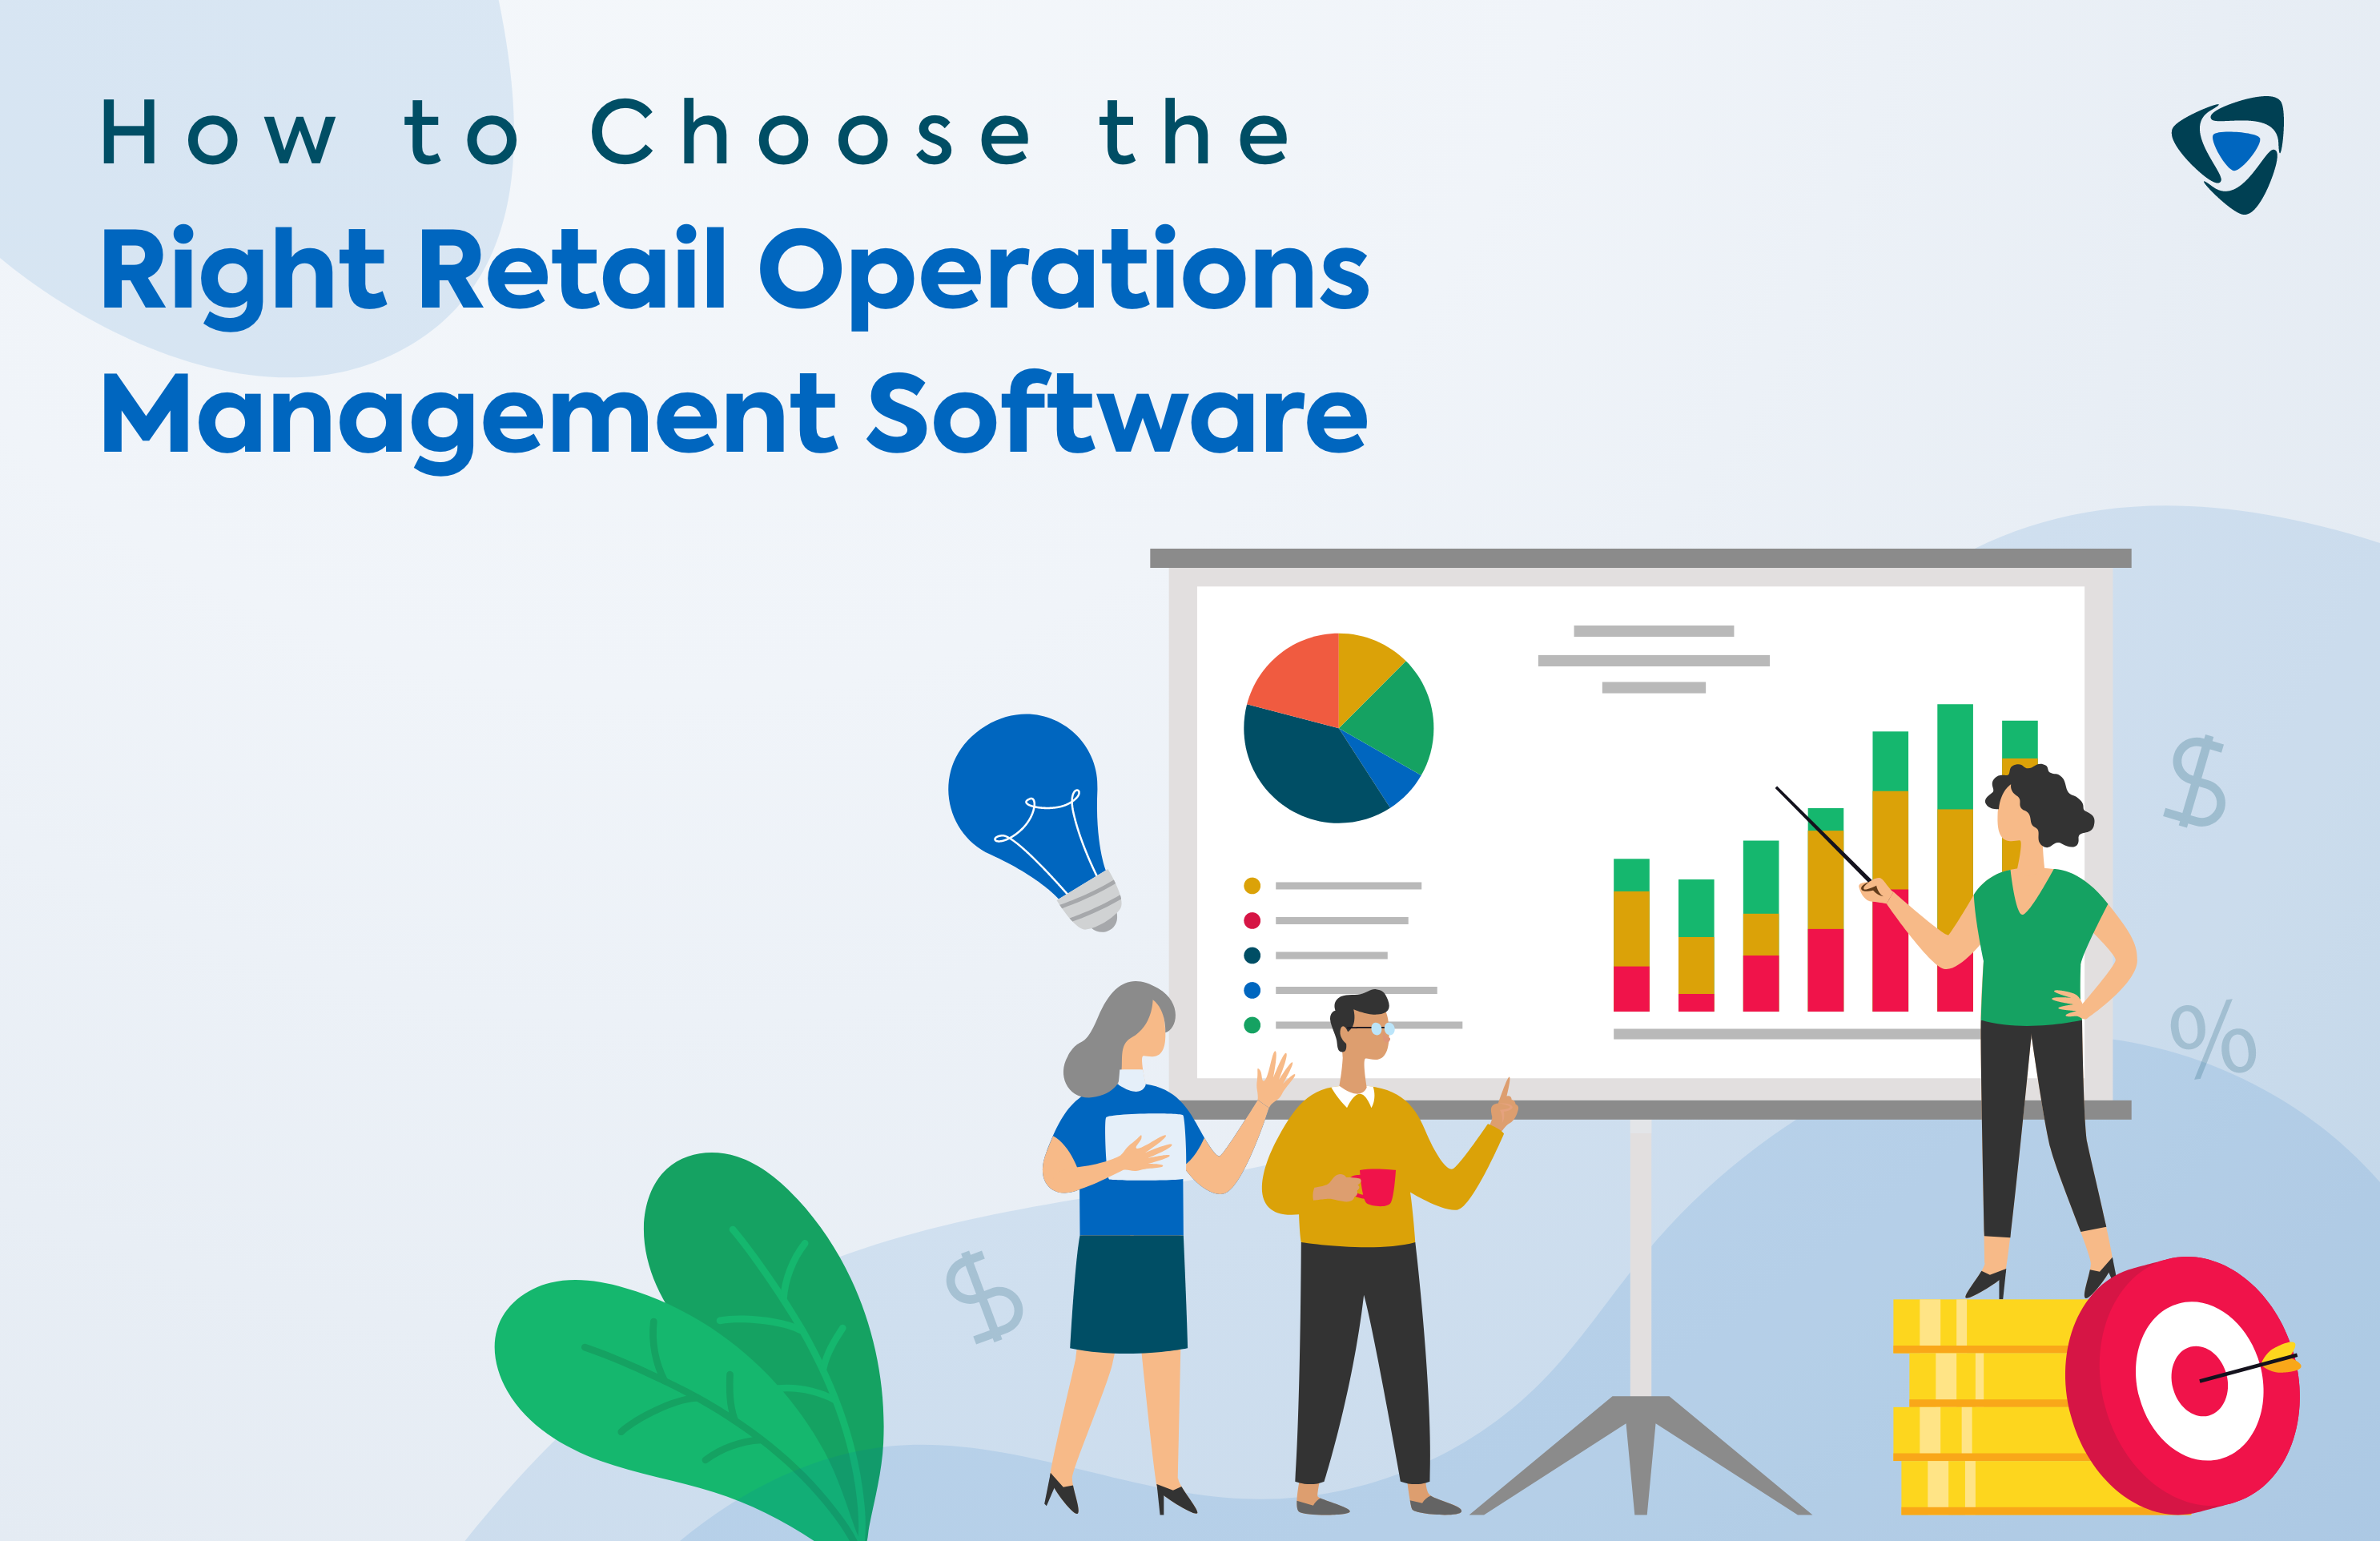 How to Choose the Right Retail Operations Management Software